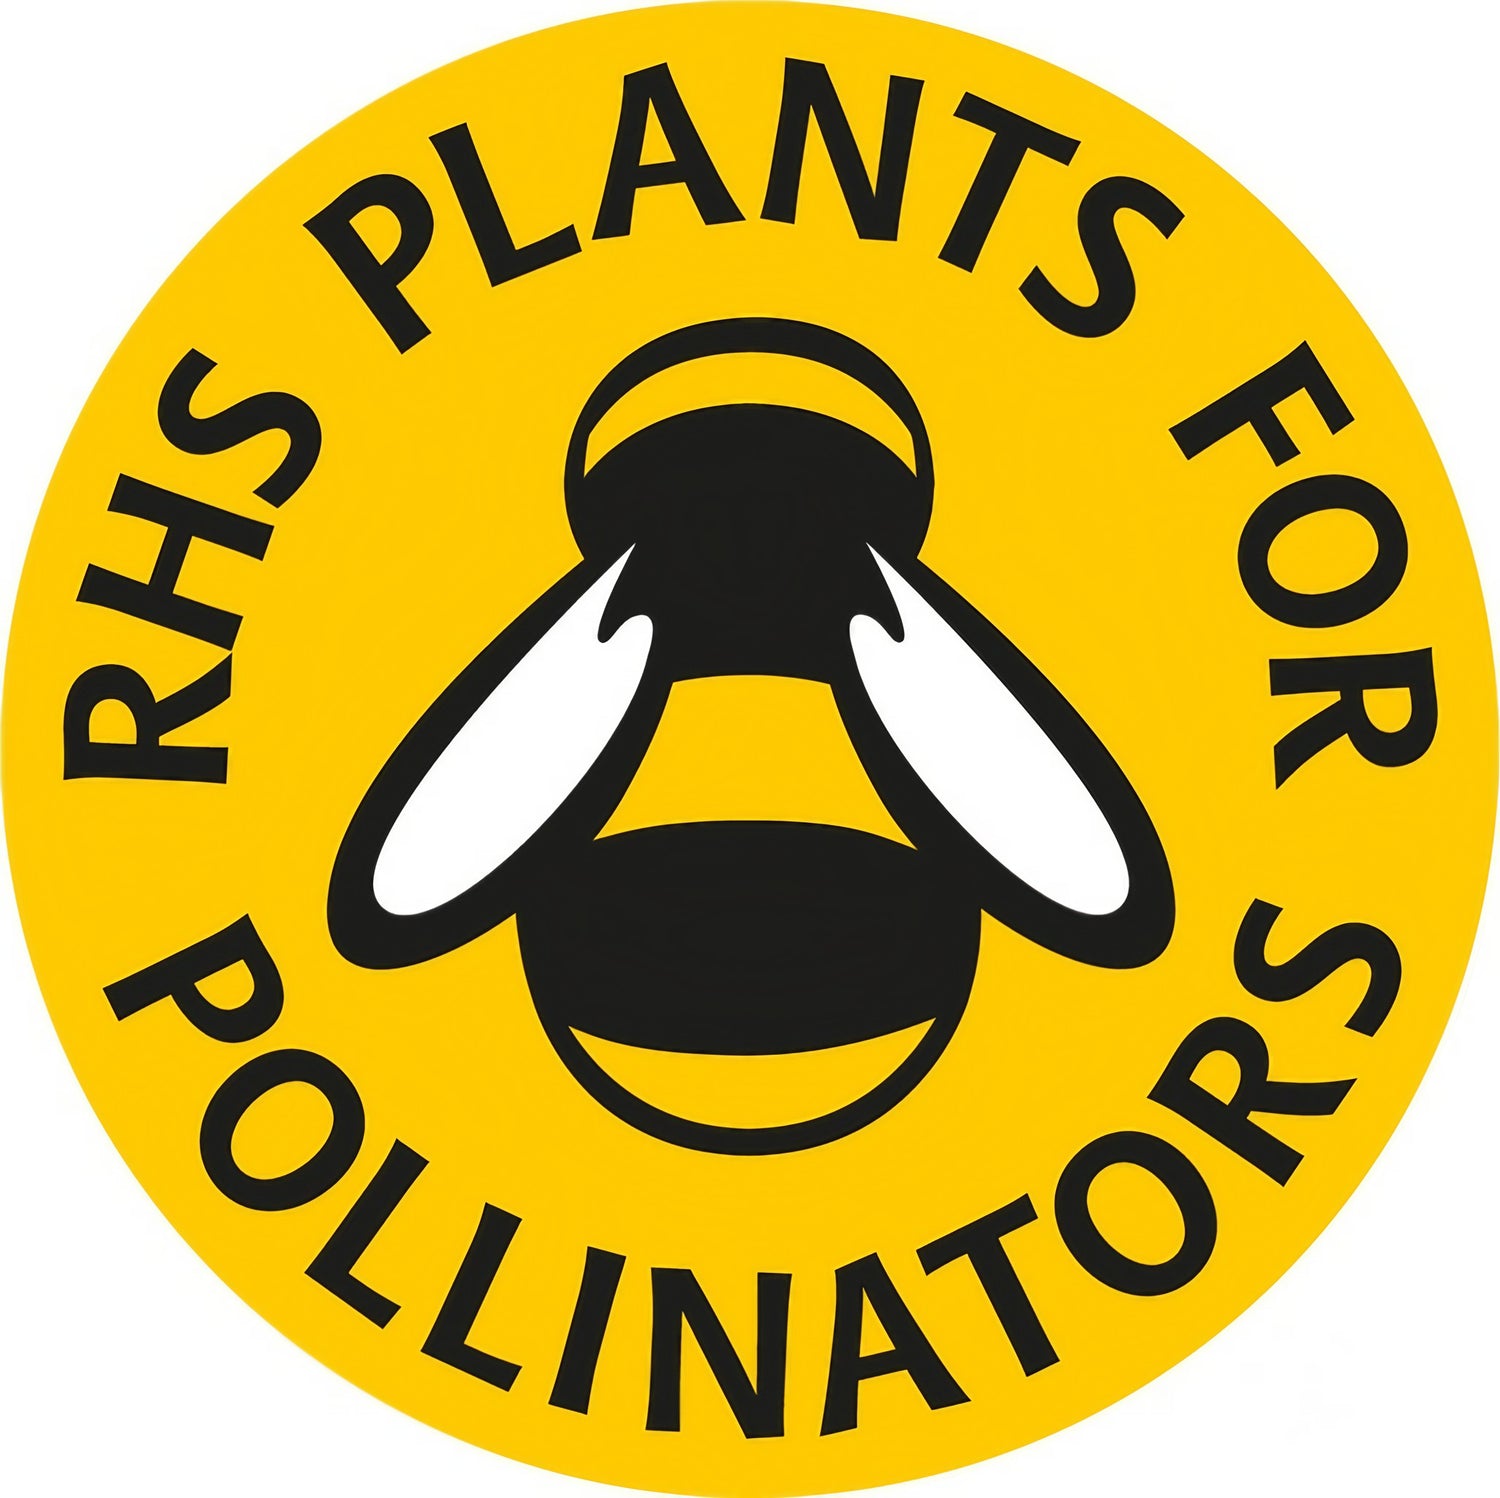 Poppy Flanders Red product logo featuring the RHS Plants for Pollinators certification